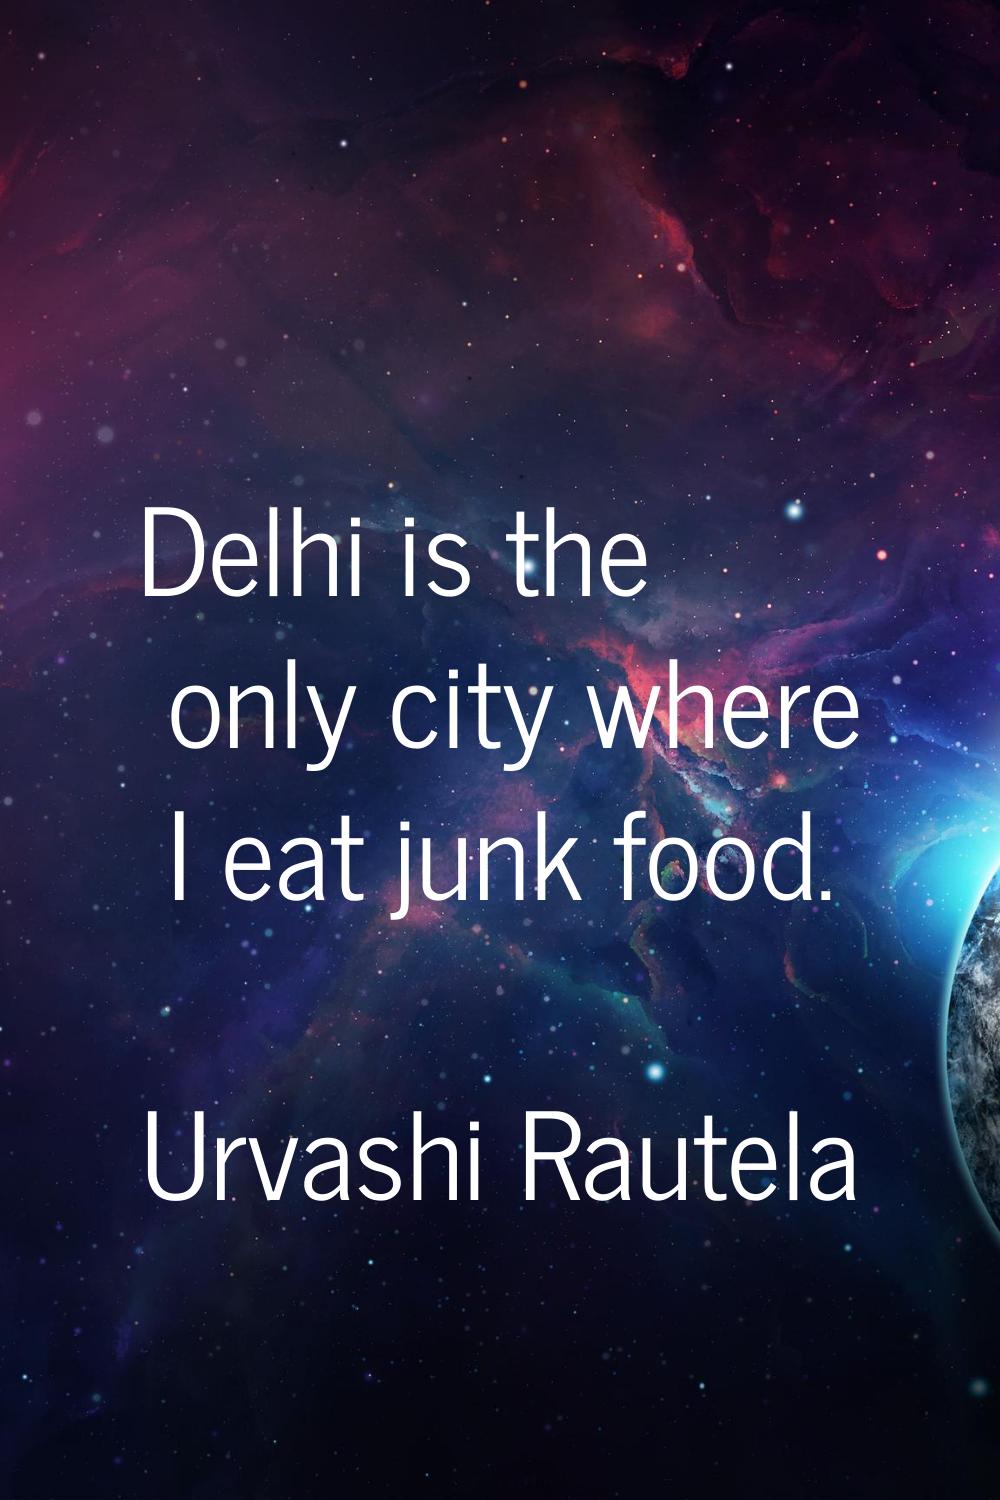 Delhi is the only city where I eat junk food.